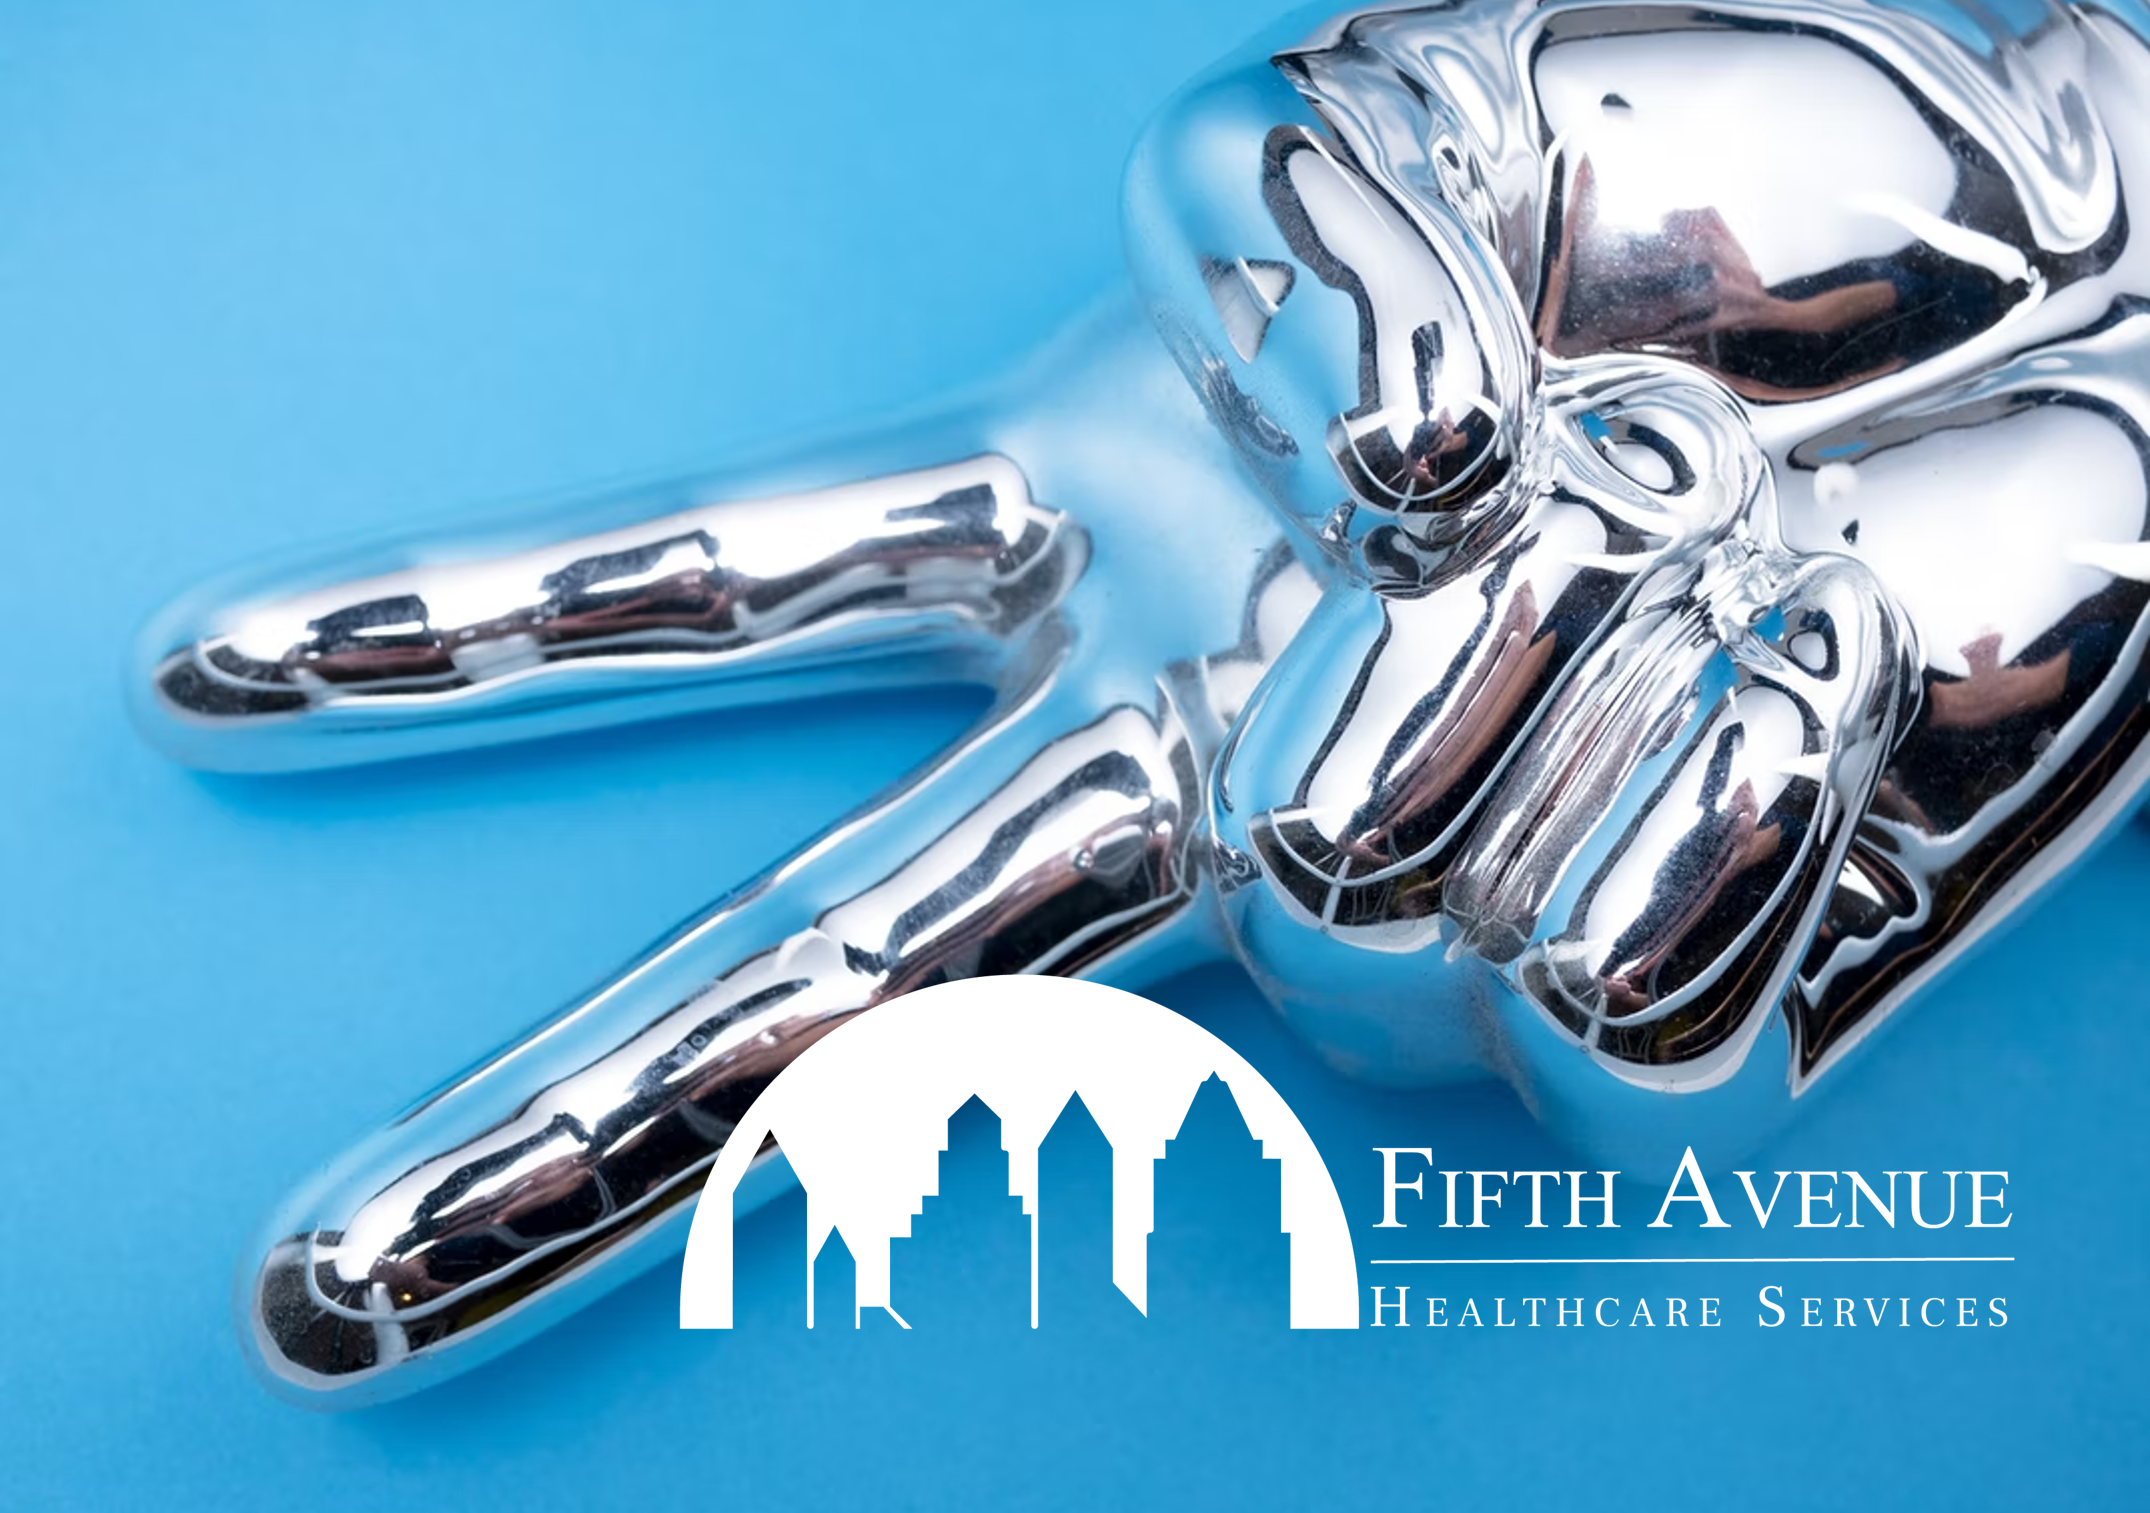 Fifth Avenue Healthcare Services Wins Two Awards